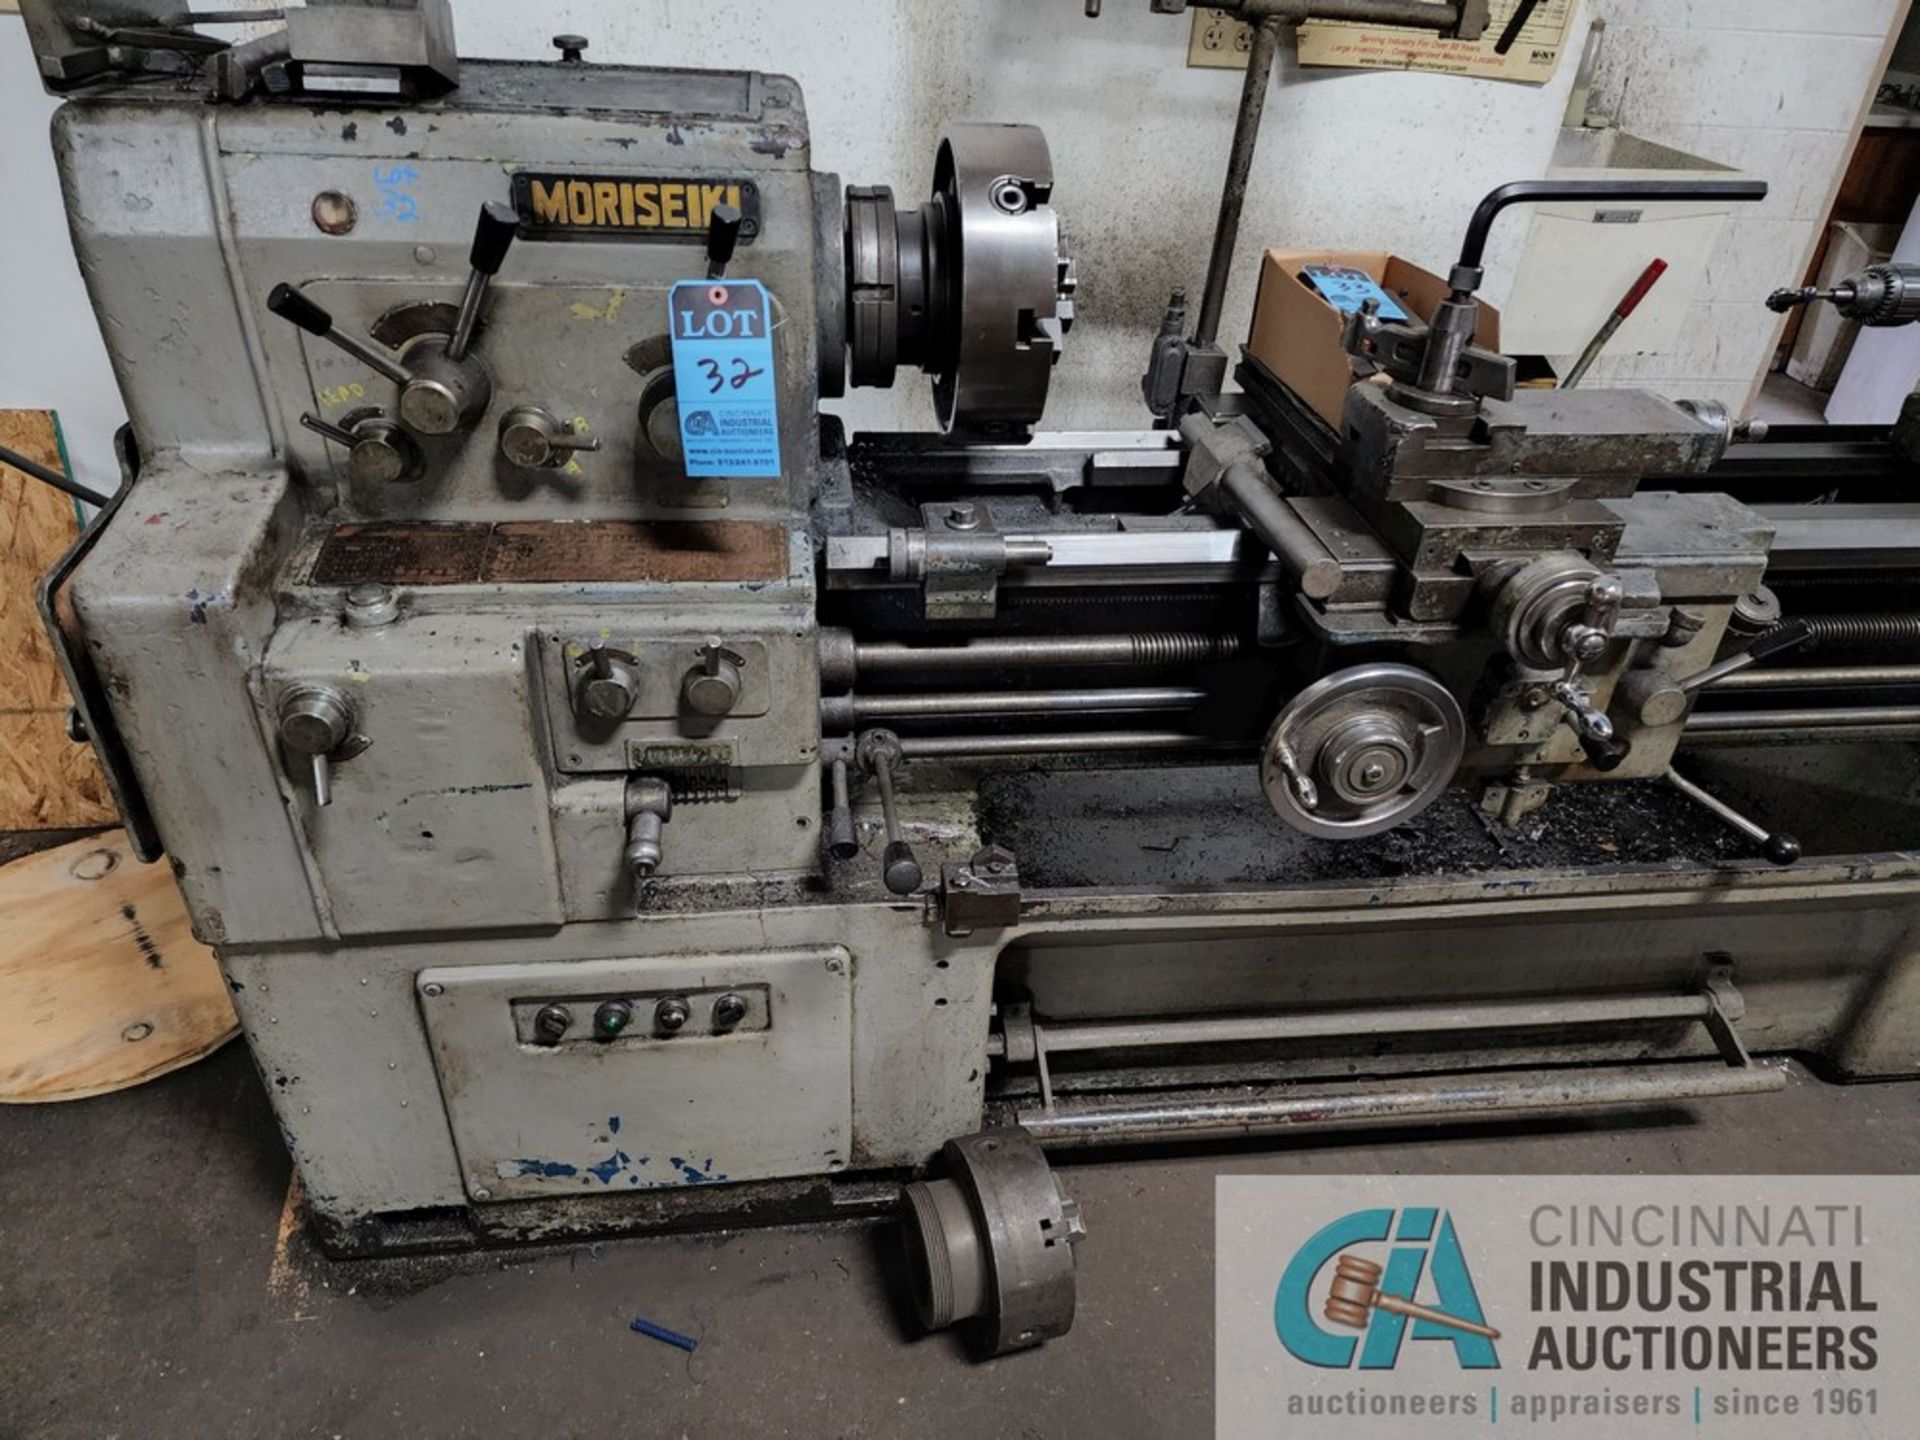 17" X 48" MORI-SEIKI TOOLROOM LATHE; S/N 693, 32 - 1,800 RPM, 12" 4-JAW CHUCK, 2" SPINDLE HOLE, - Image 4 of 7